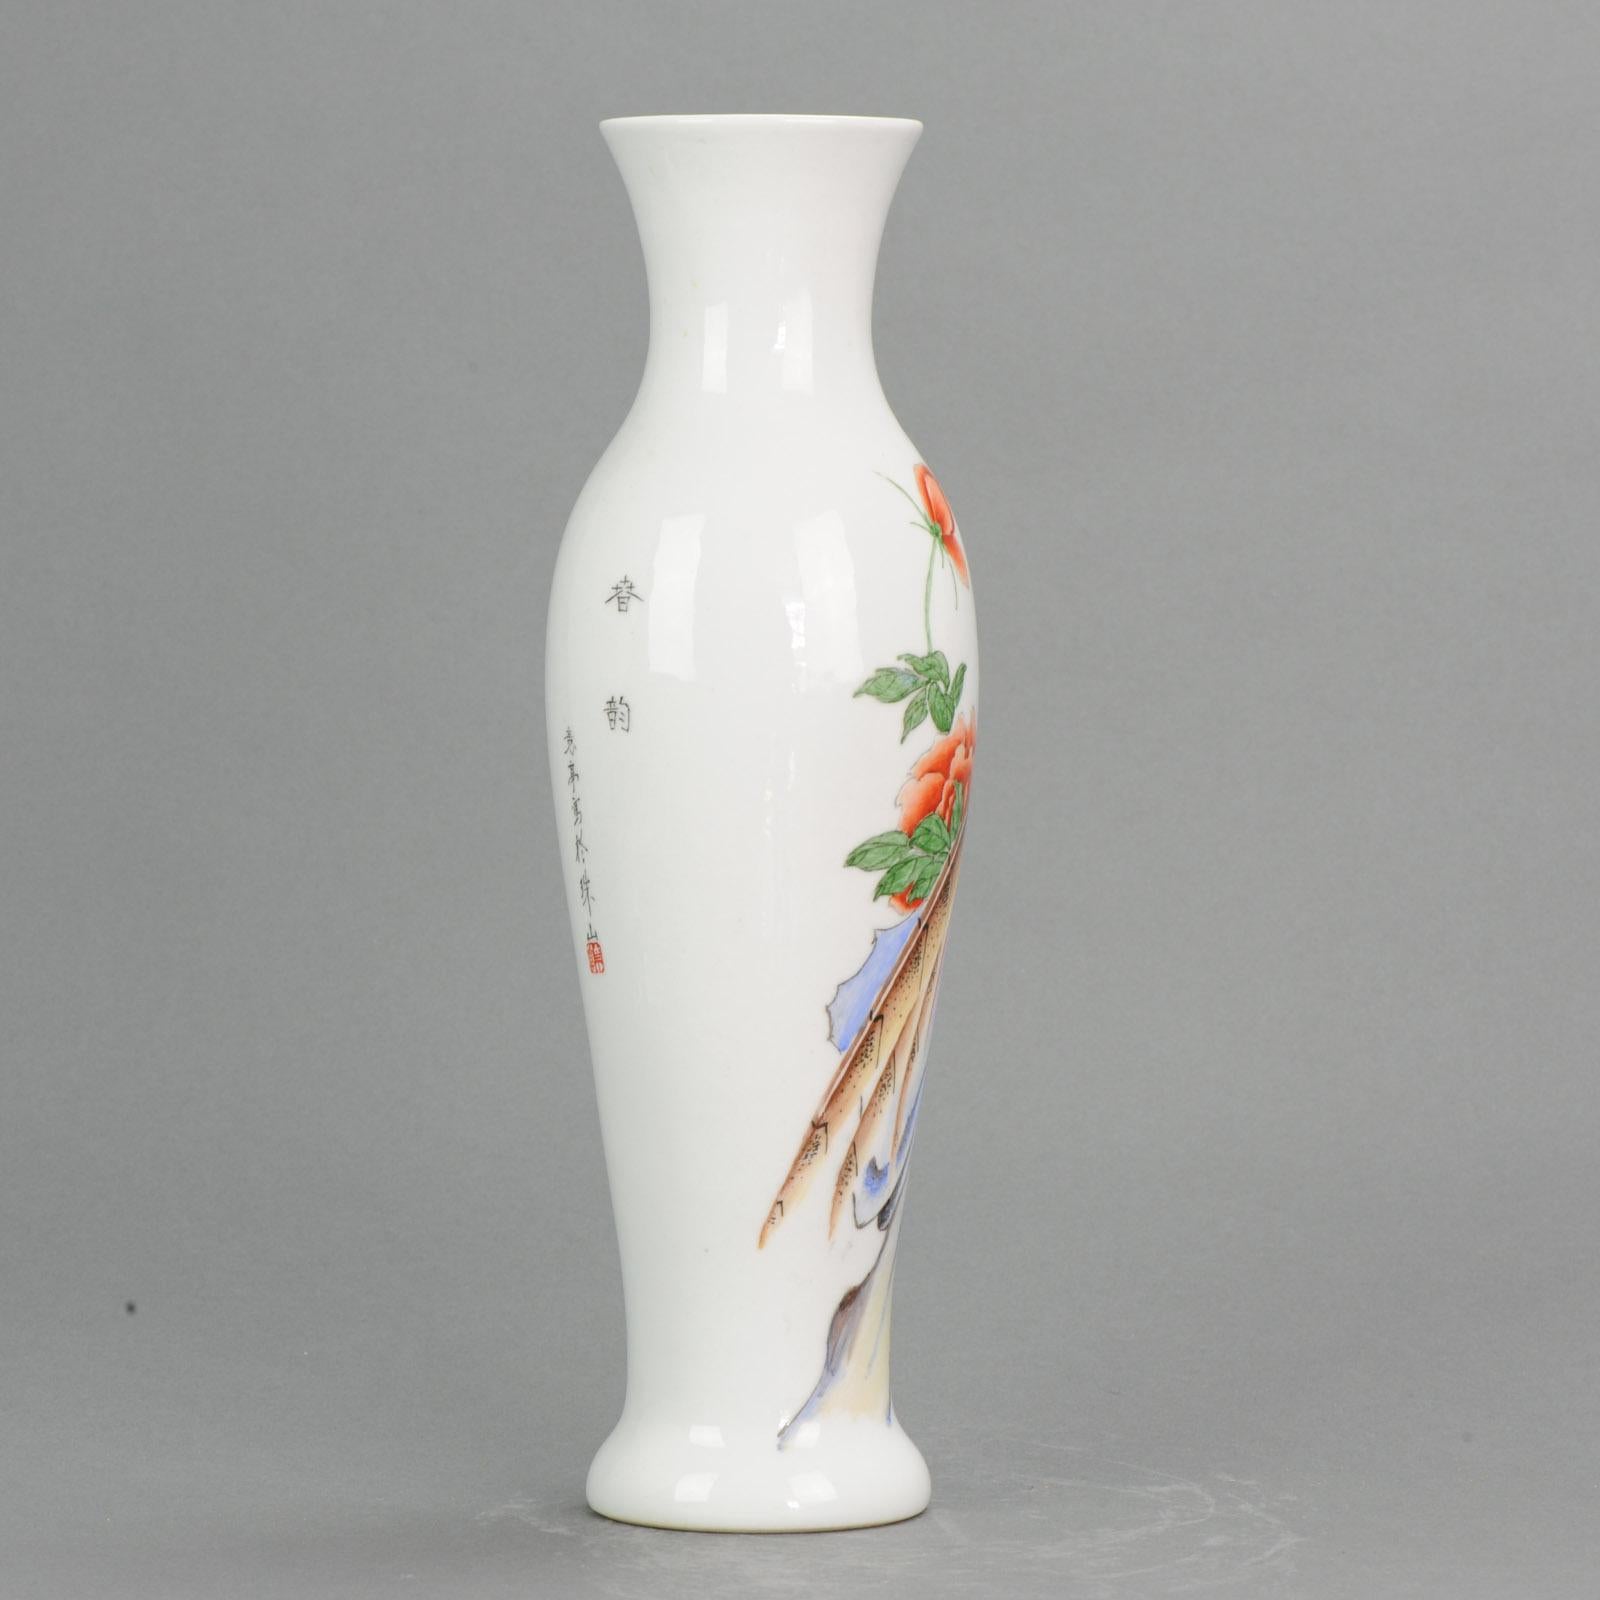 Very nice vase lovely decoration. Unusual modern style

Bought in Hong Kong in 1992Very nice vase with a stunning floral decoration.

Additional information:
Material: China
Region of Origin: China
Country of Manufacturing: China
Period: 20th